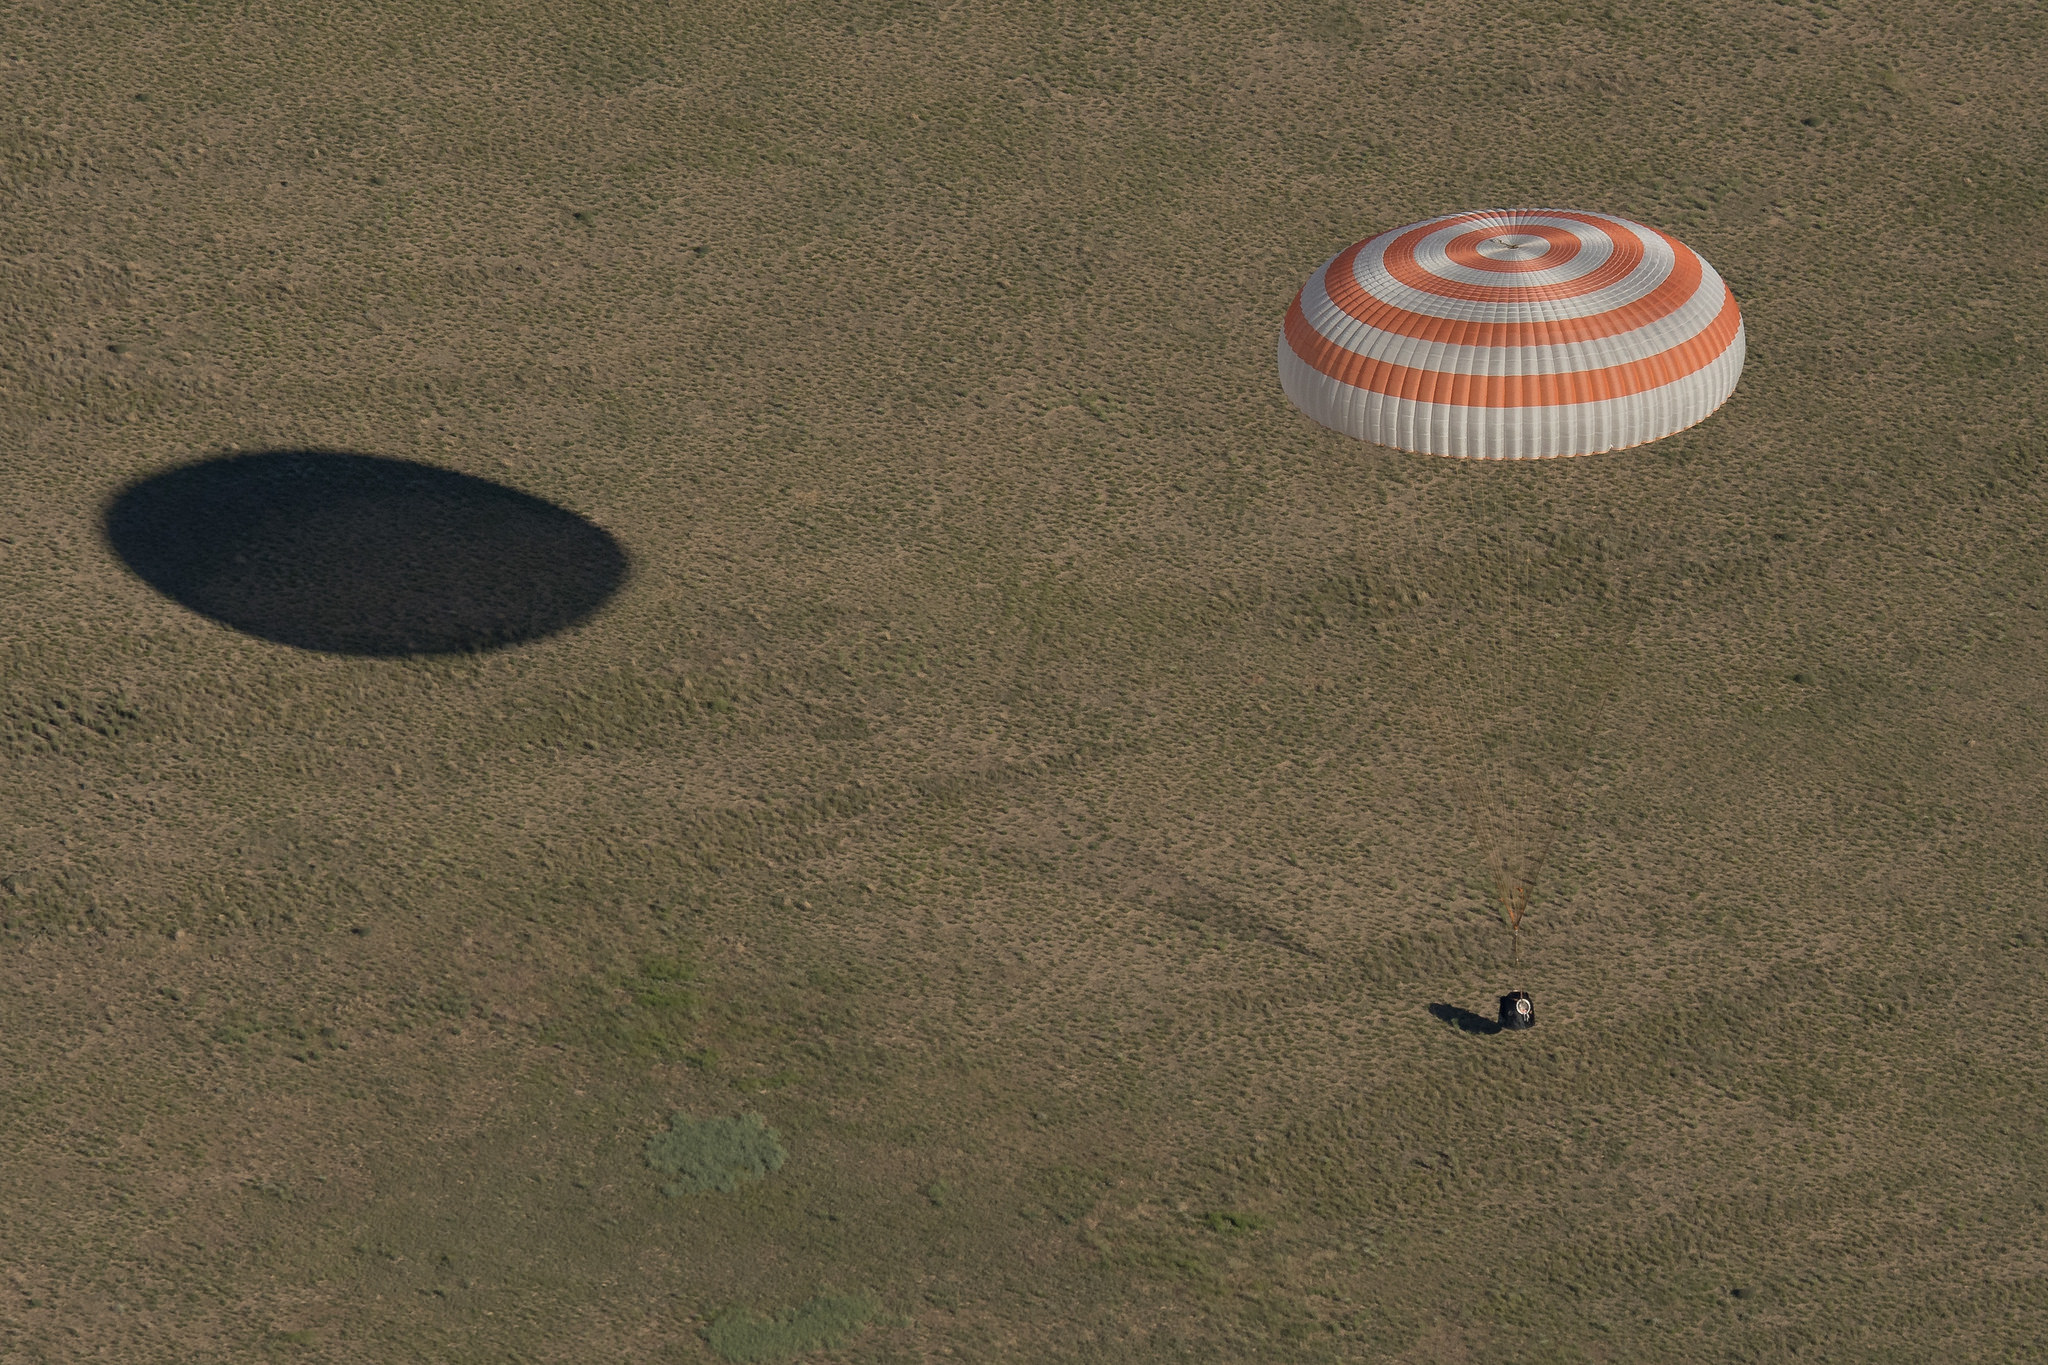 Three Expedition 55 crew members landed safely in Kazakhstan June 3.